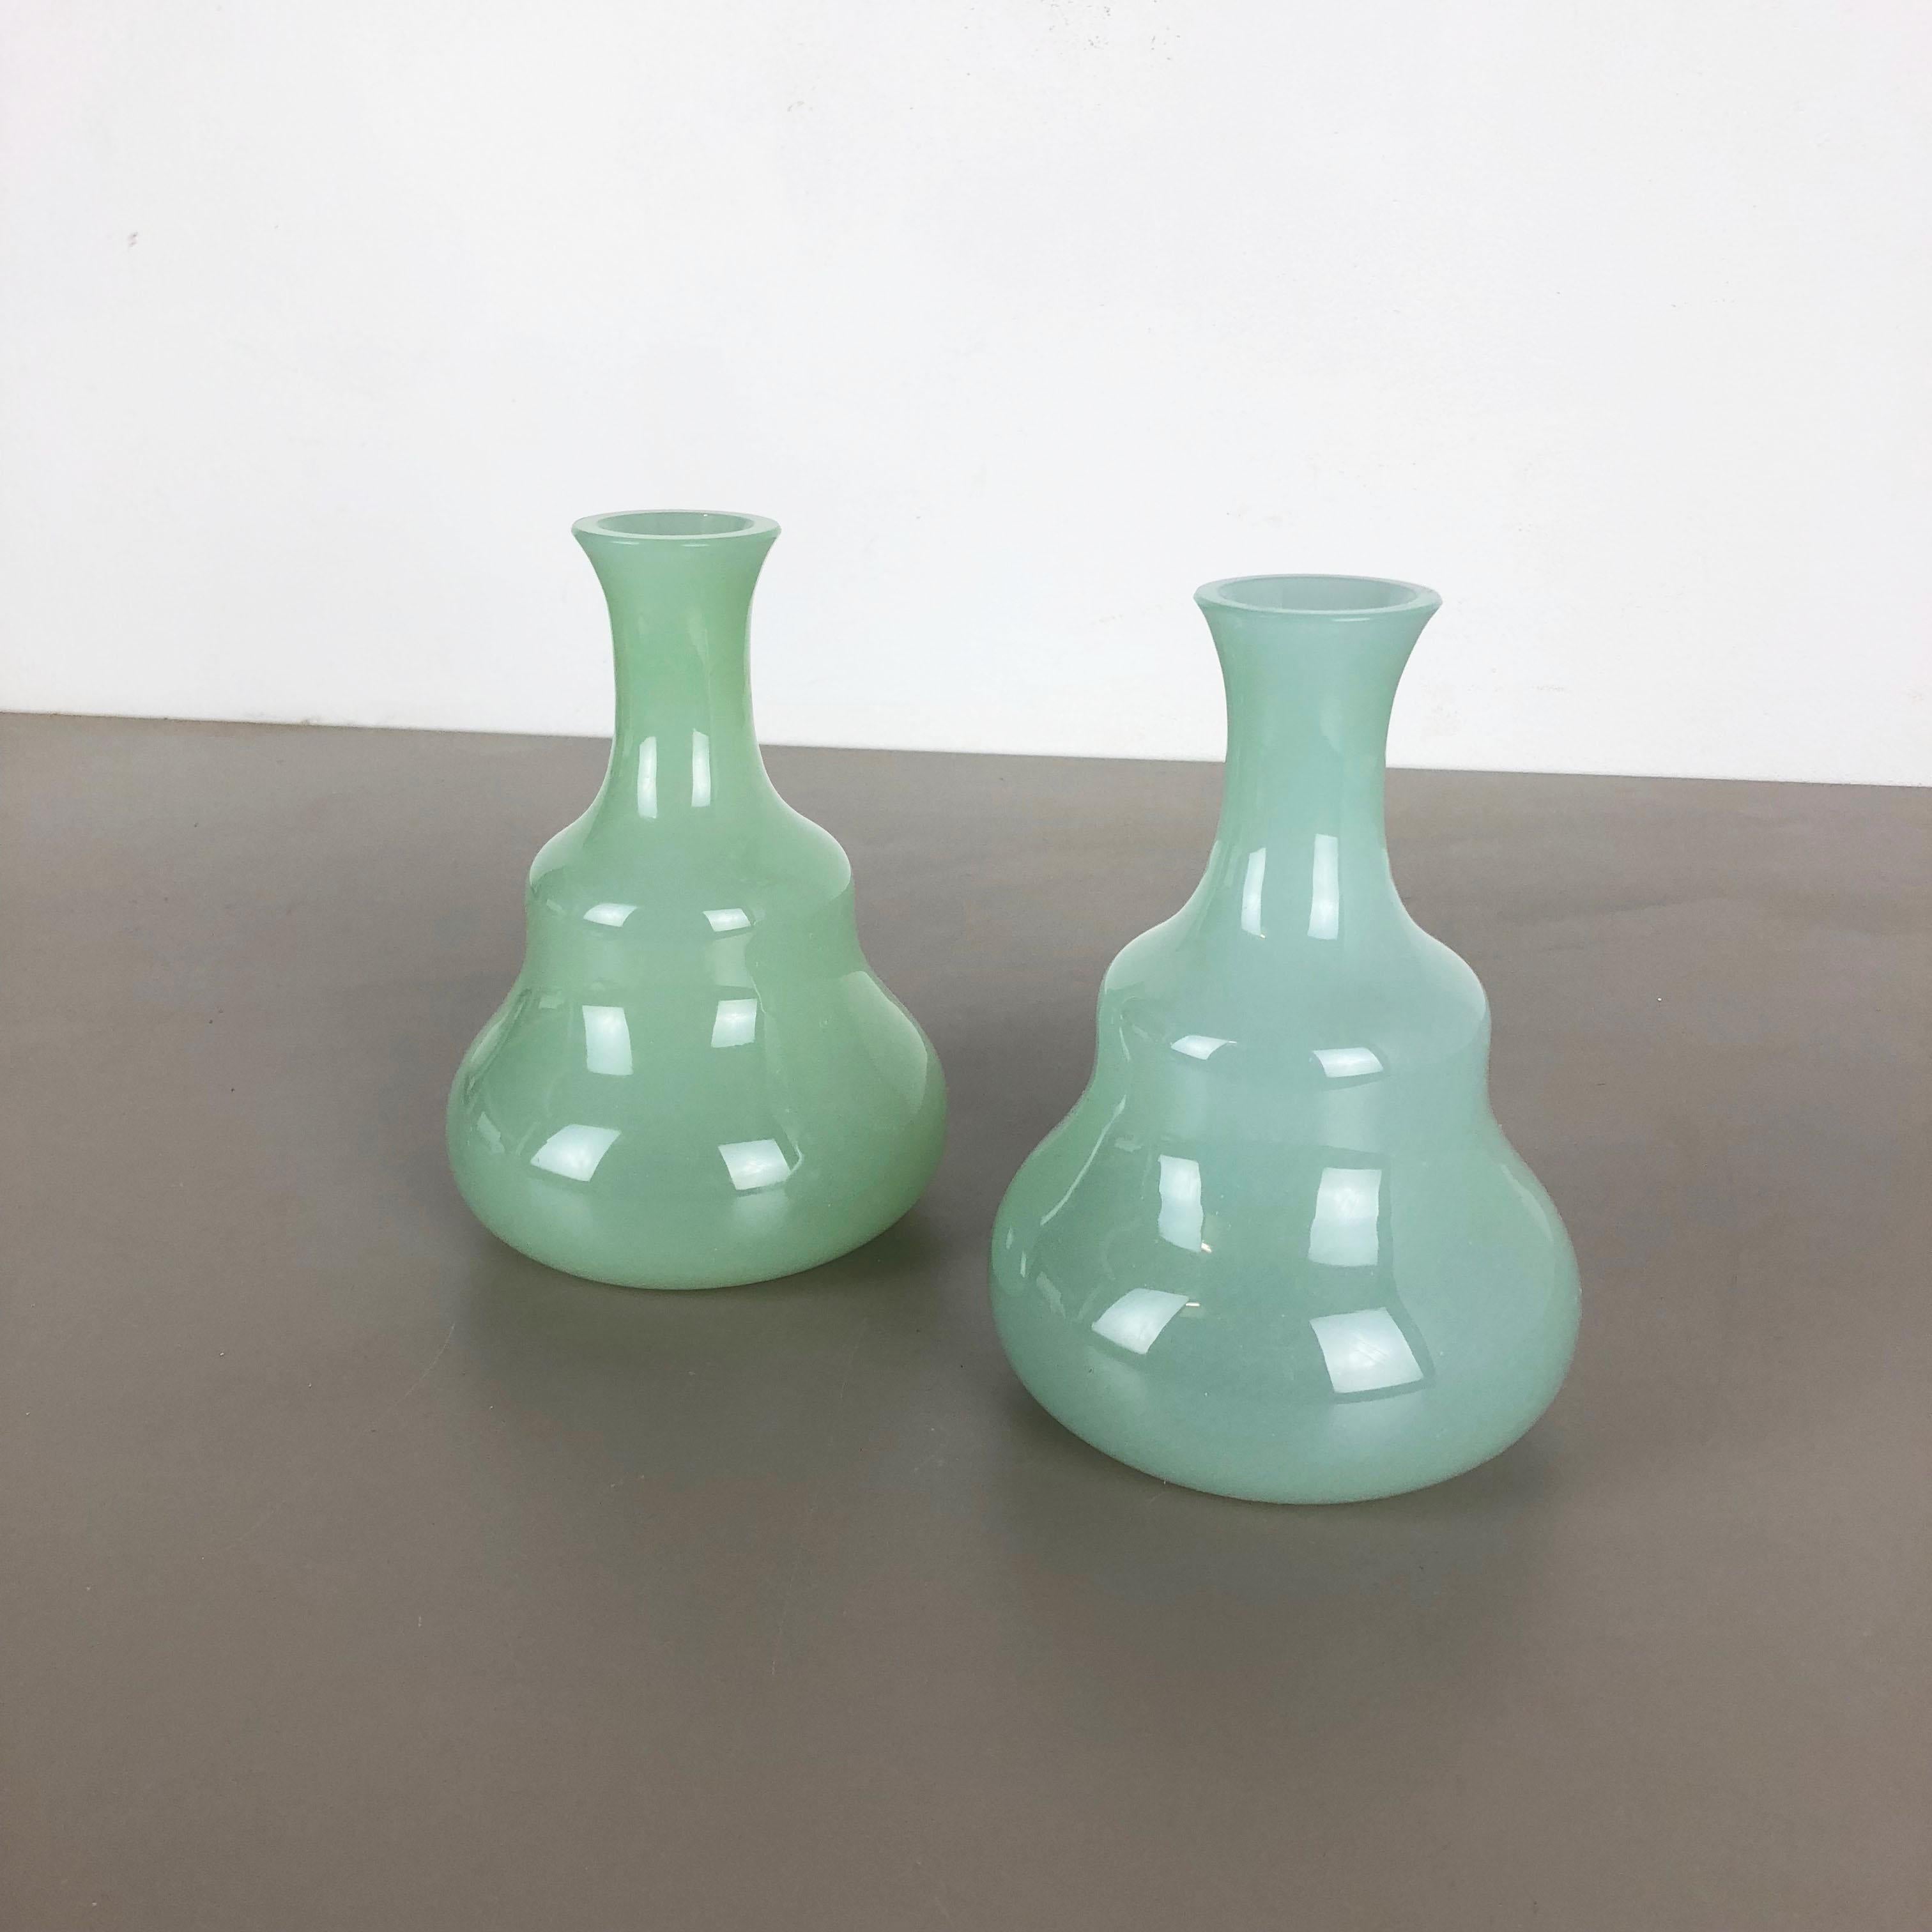 Set of 2 New Old Stock Murano Opaline Glass Vases by Gino Cenedese, 1960s (Moderne der Mitte des Jahrhunderts)